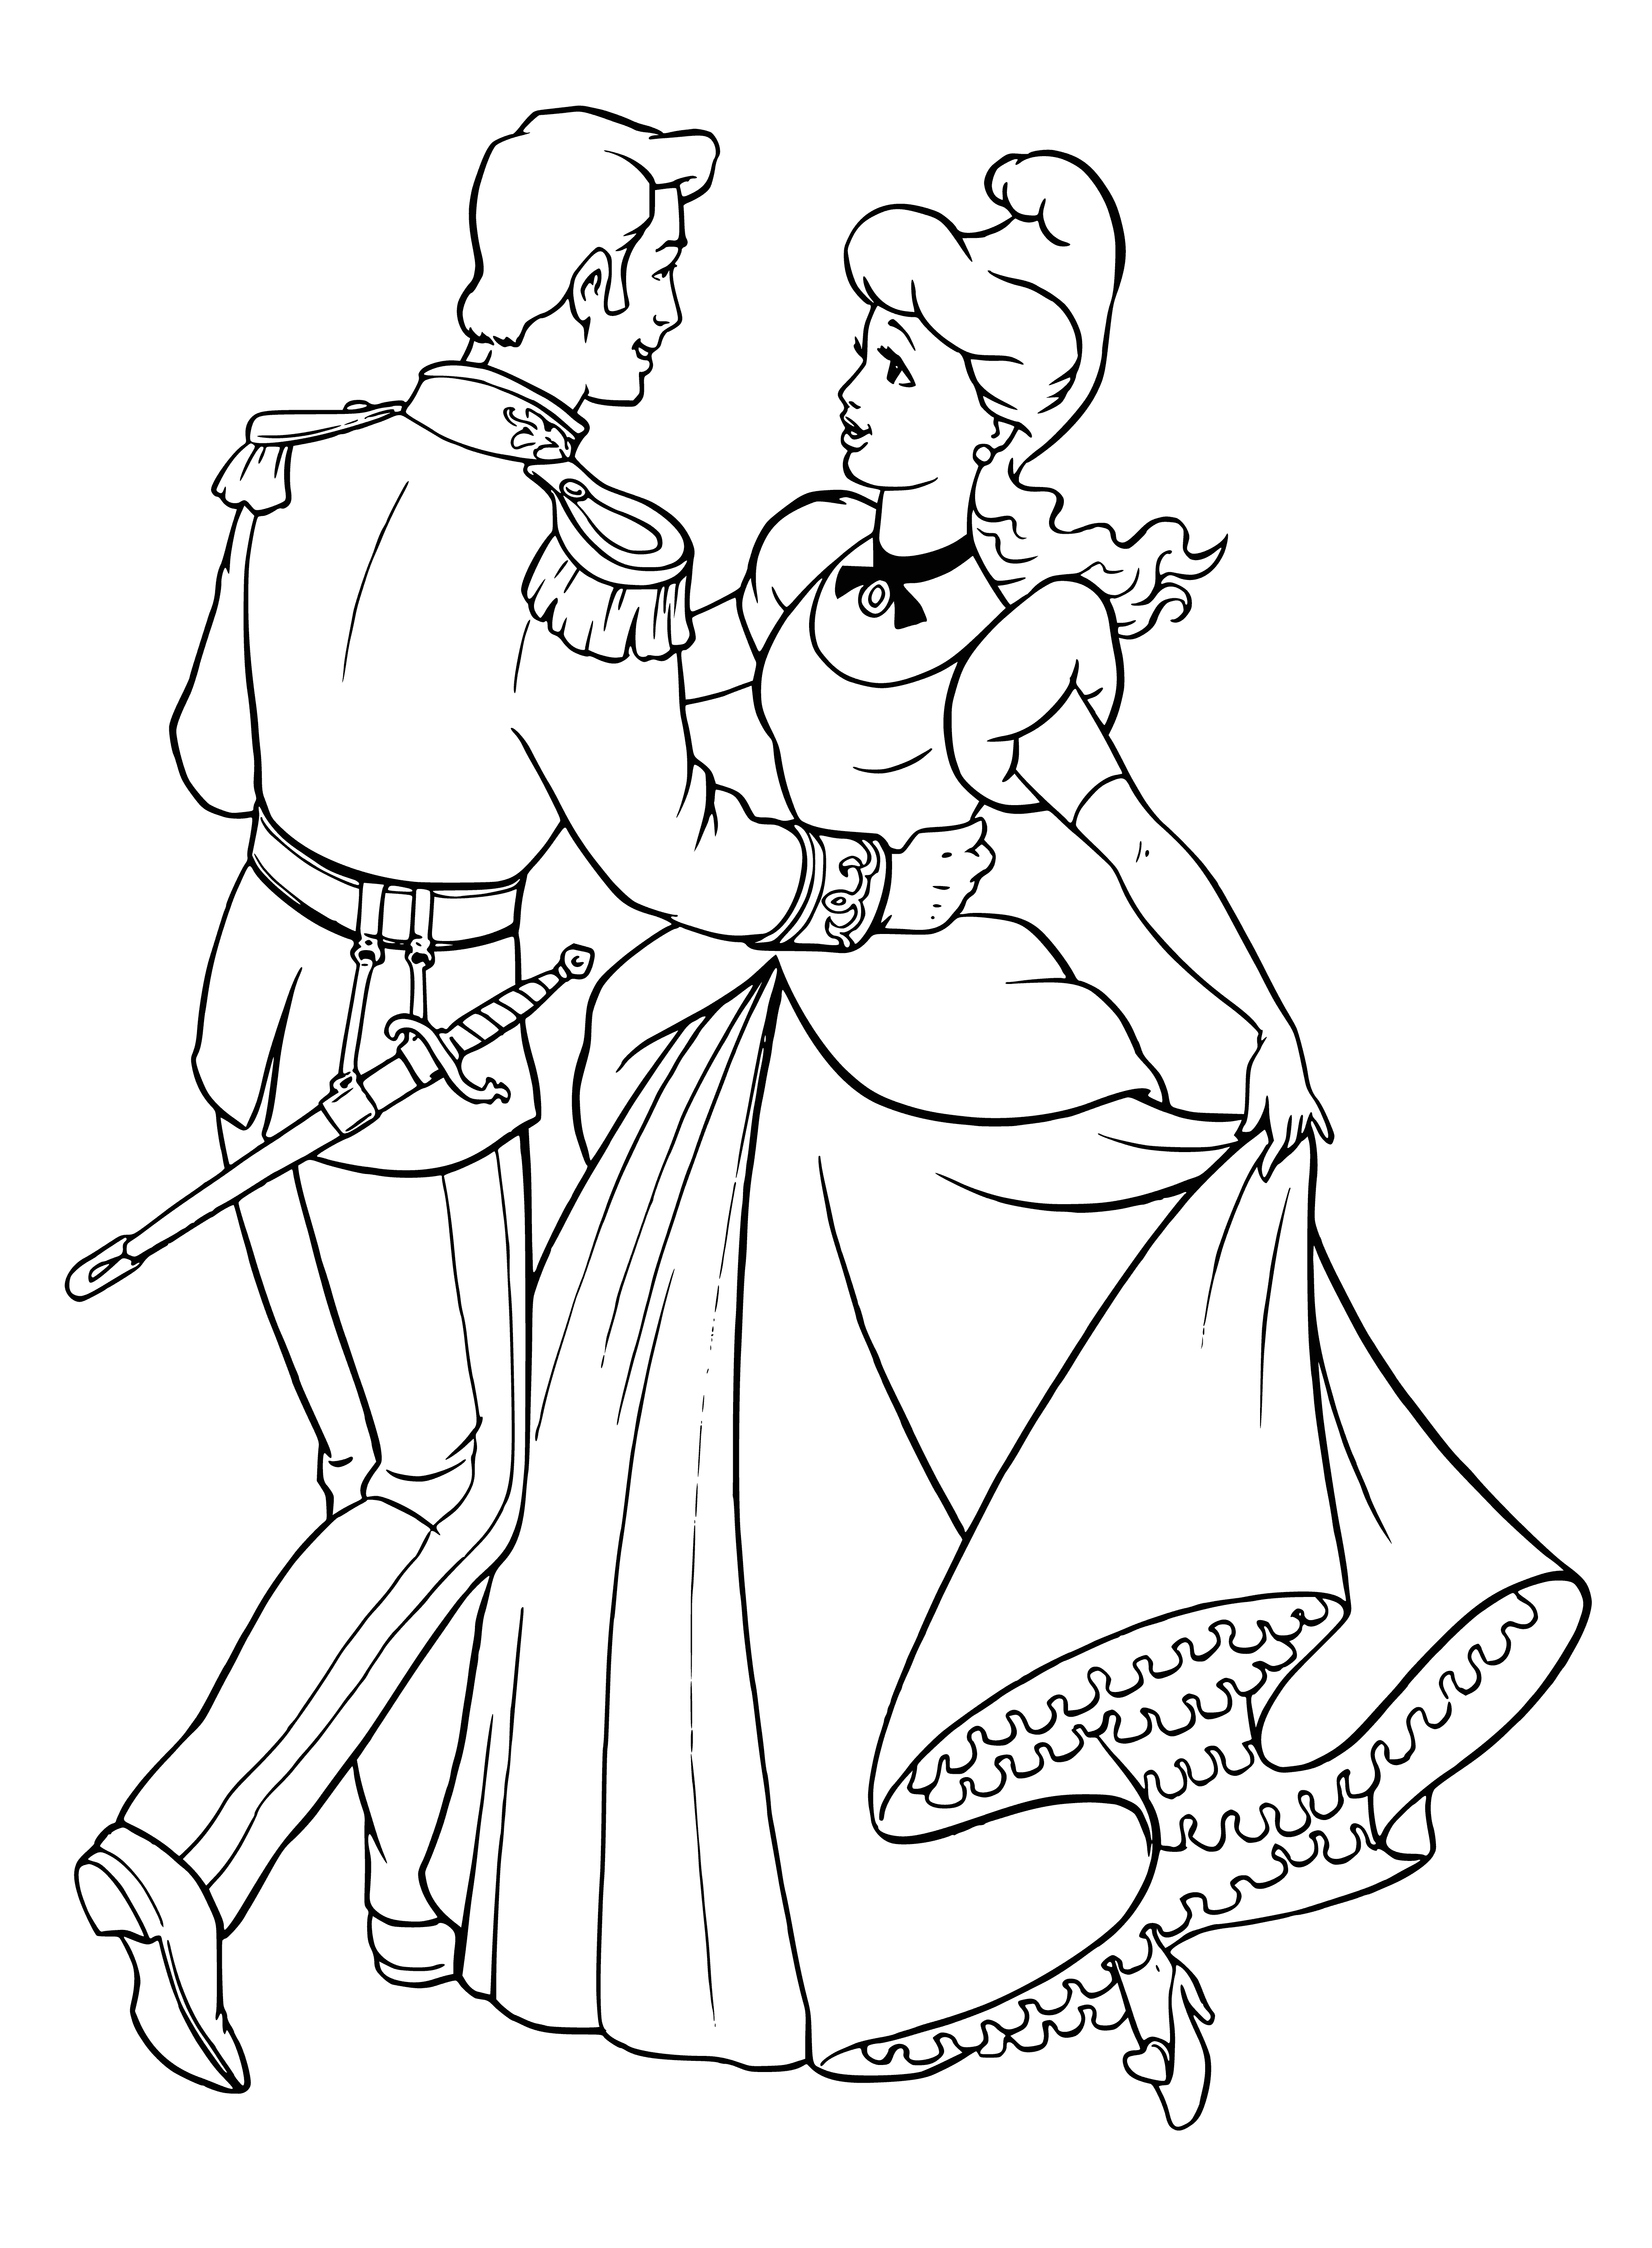 coloring page: Prince stands w/white shirt+blue jacket+pants; holding blue ball. Cinderella in blue dress+white apron; broom in right hand.